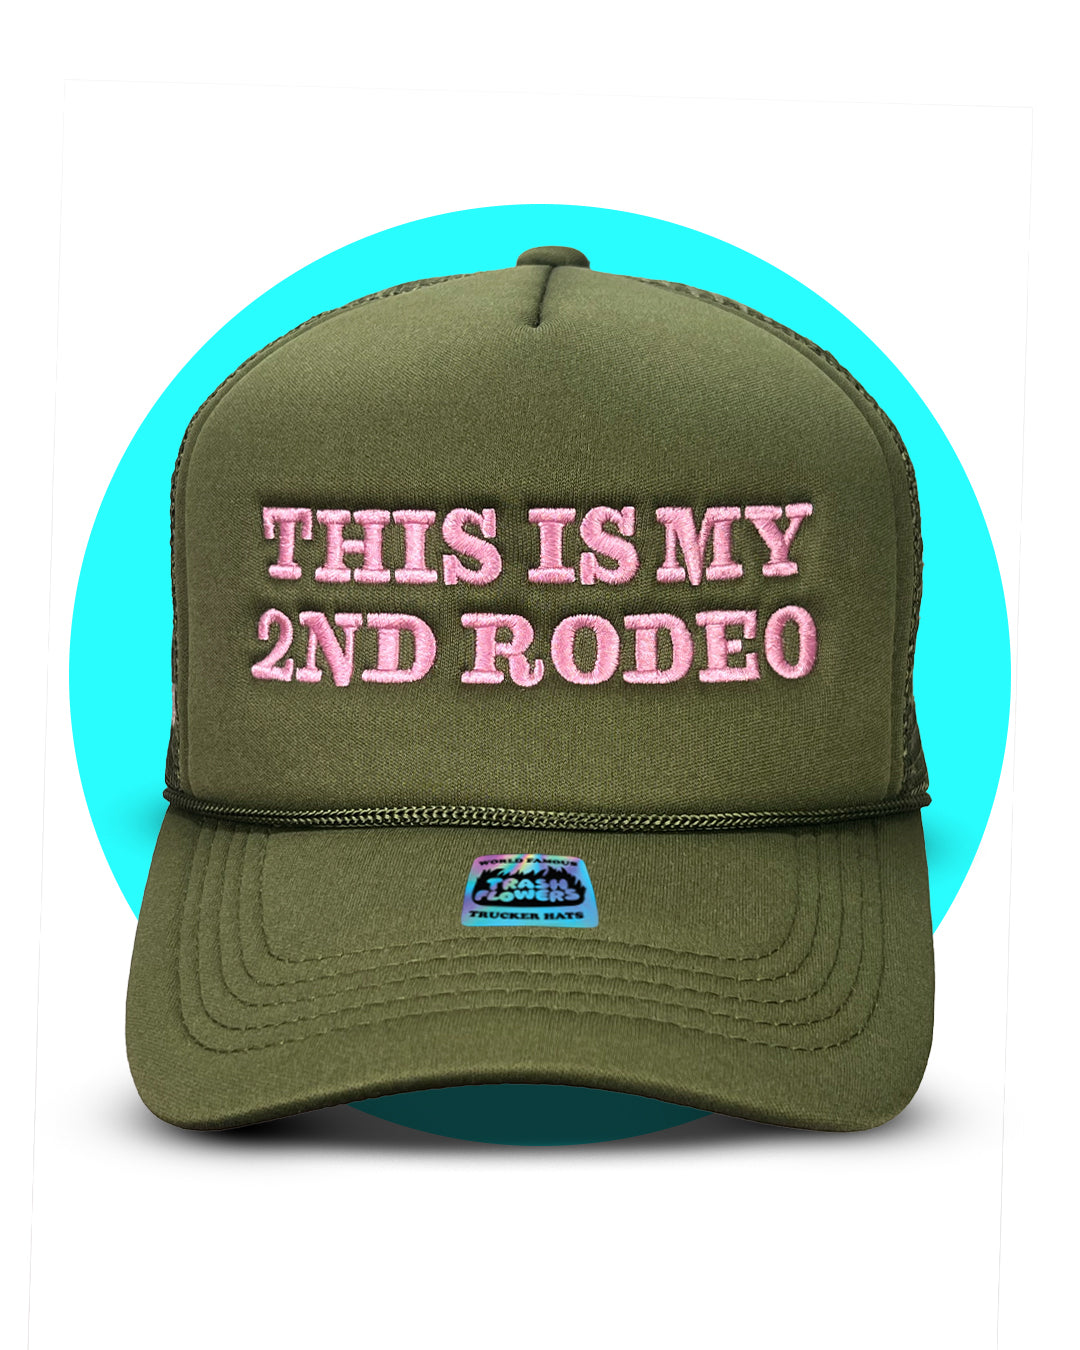 Ltd. Edition This is My 2nd Rodeo Trucker Hat